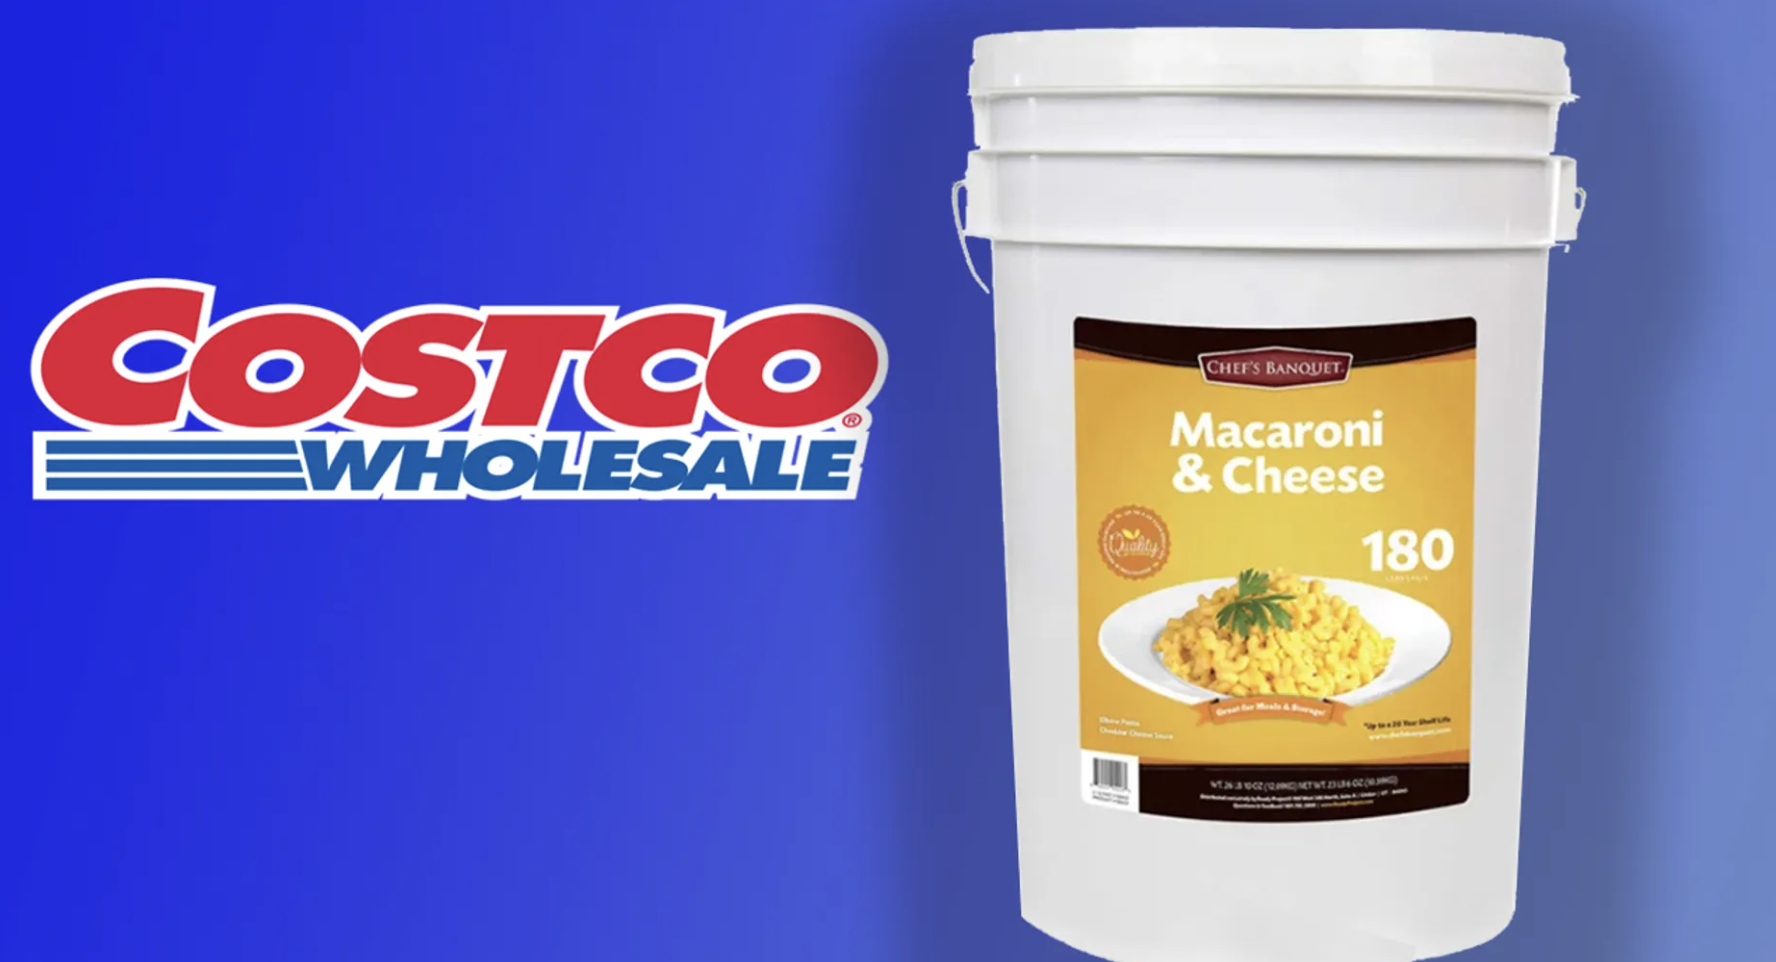 “Costco sells out of 26 lb. mac & cheese tub with 20-year shelf life.”